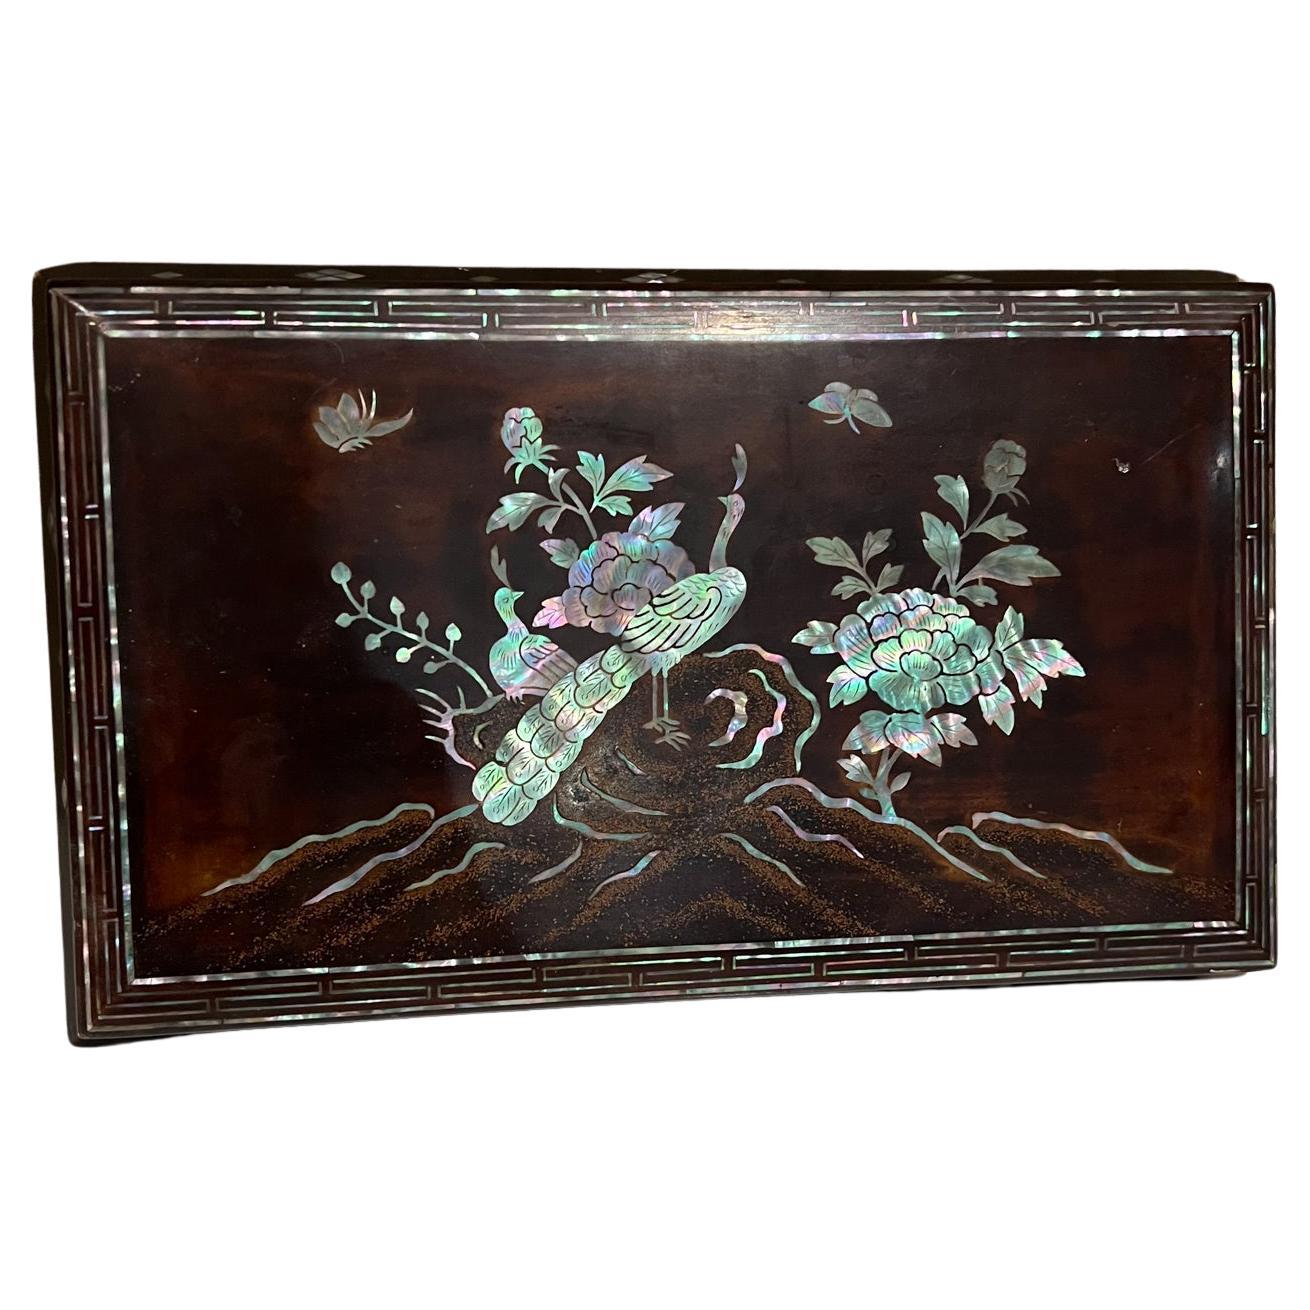 Early 20th Century 1920s Antique Chinese Decorative Smoking Box Wood and Mother of Pearl Inlay